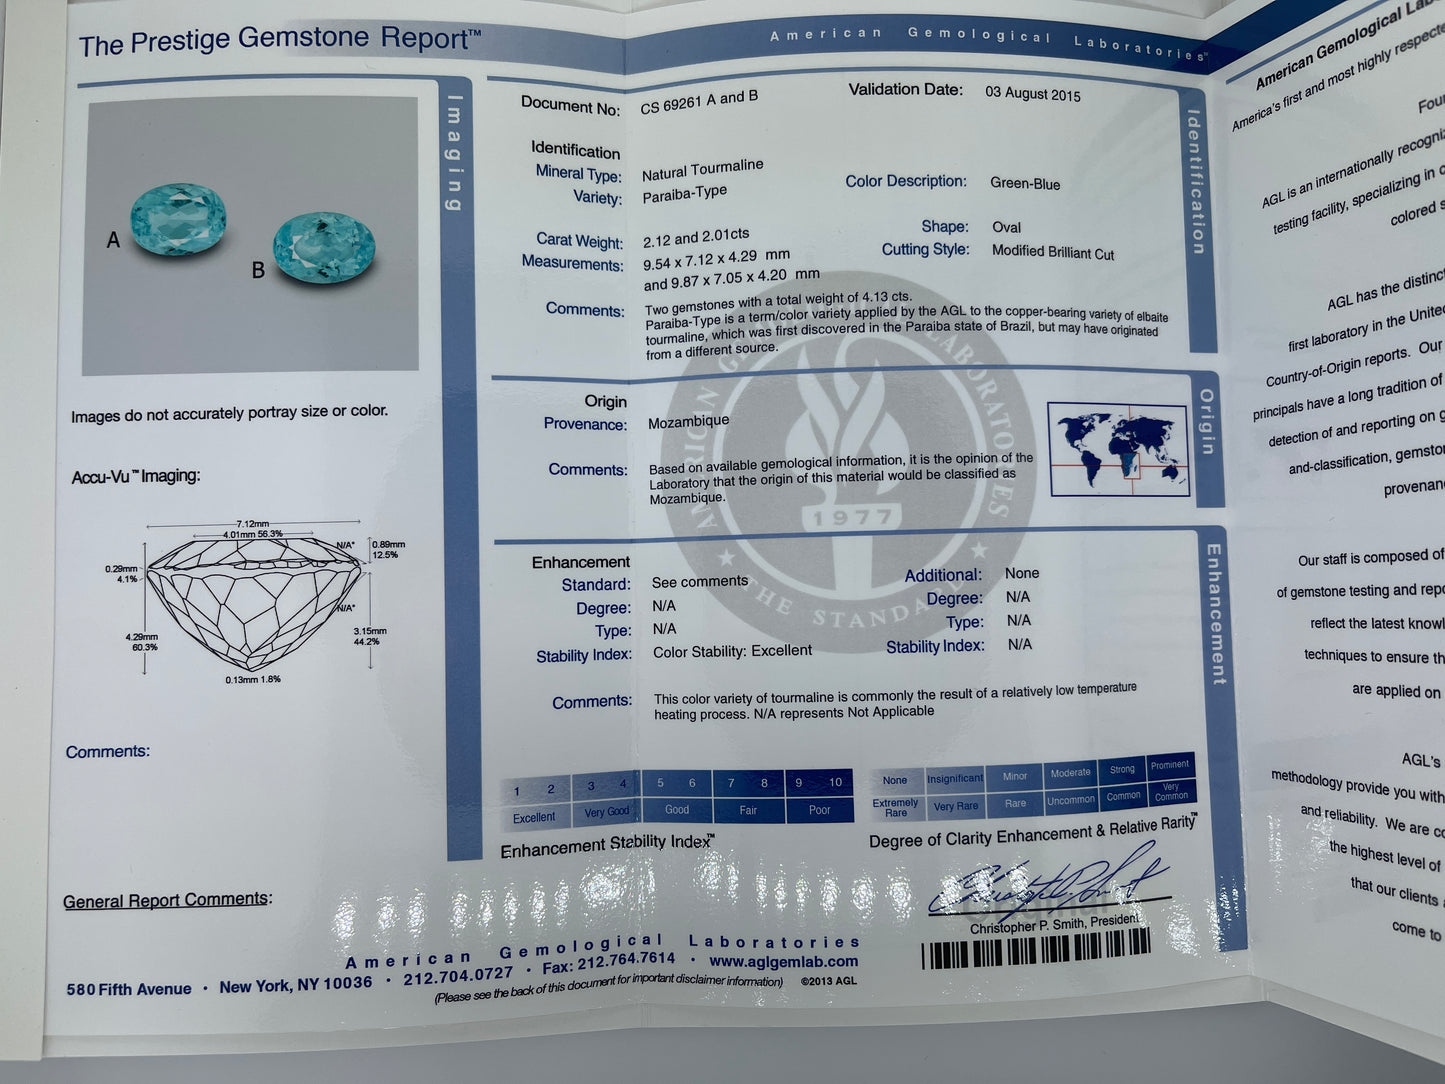 Load image into Gallery viewer, Certified Rare Blue Paraiba and Diamond Earrings
